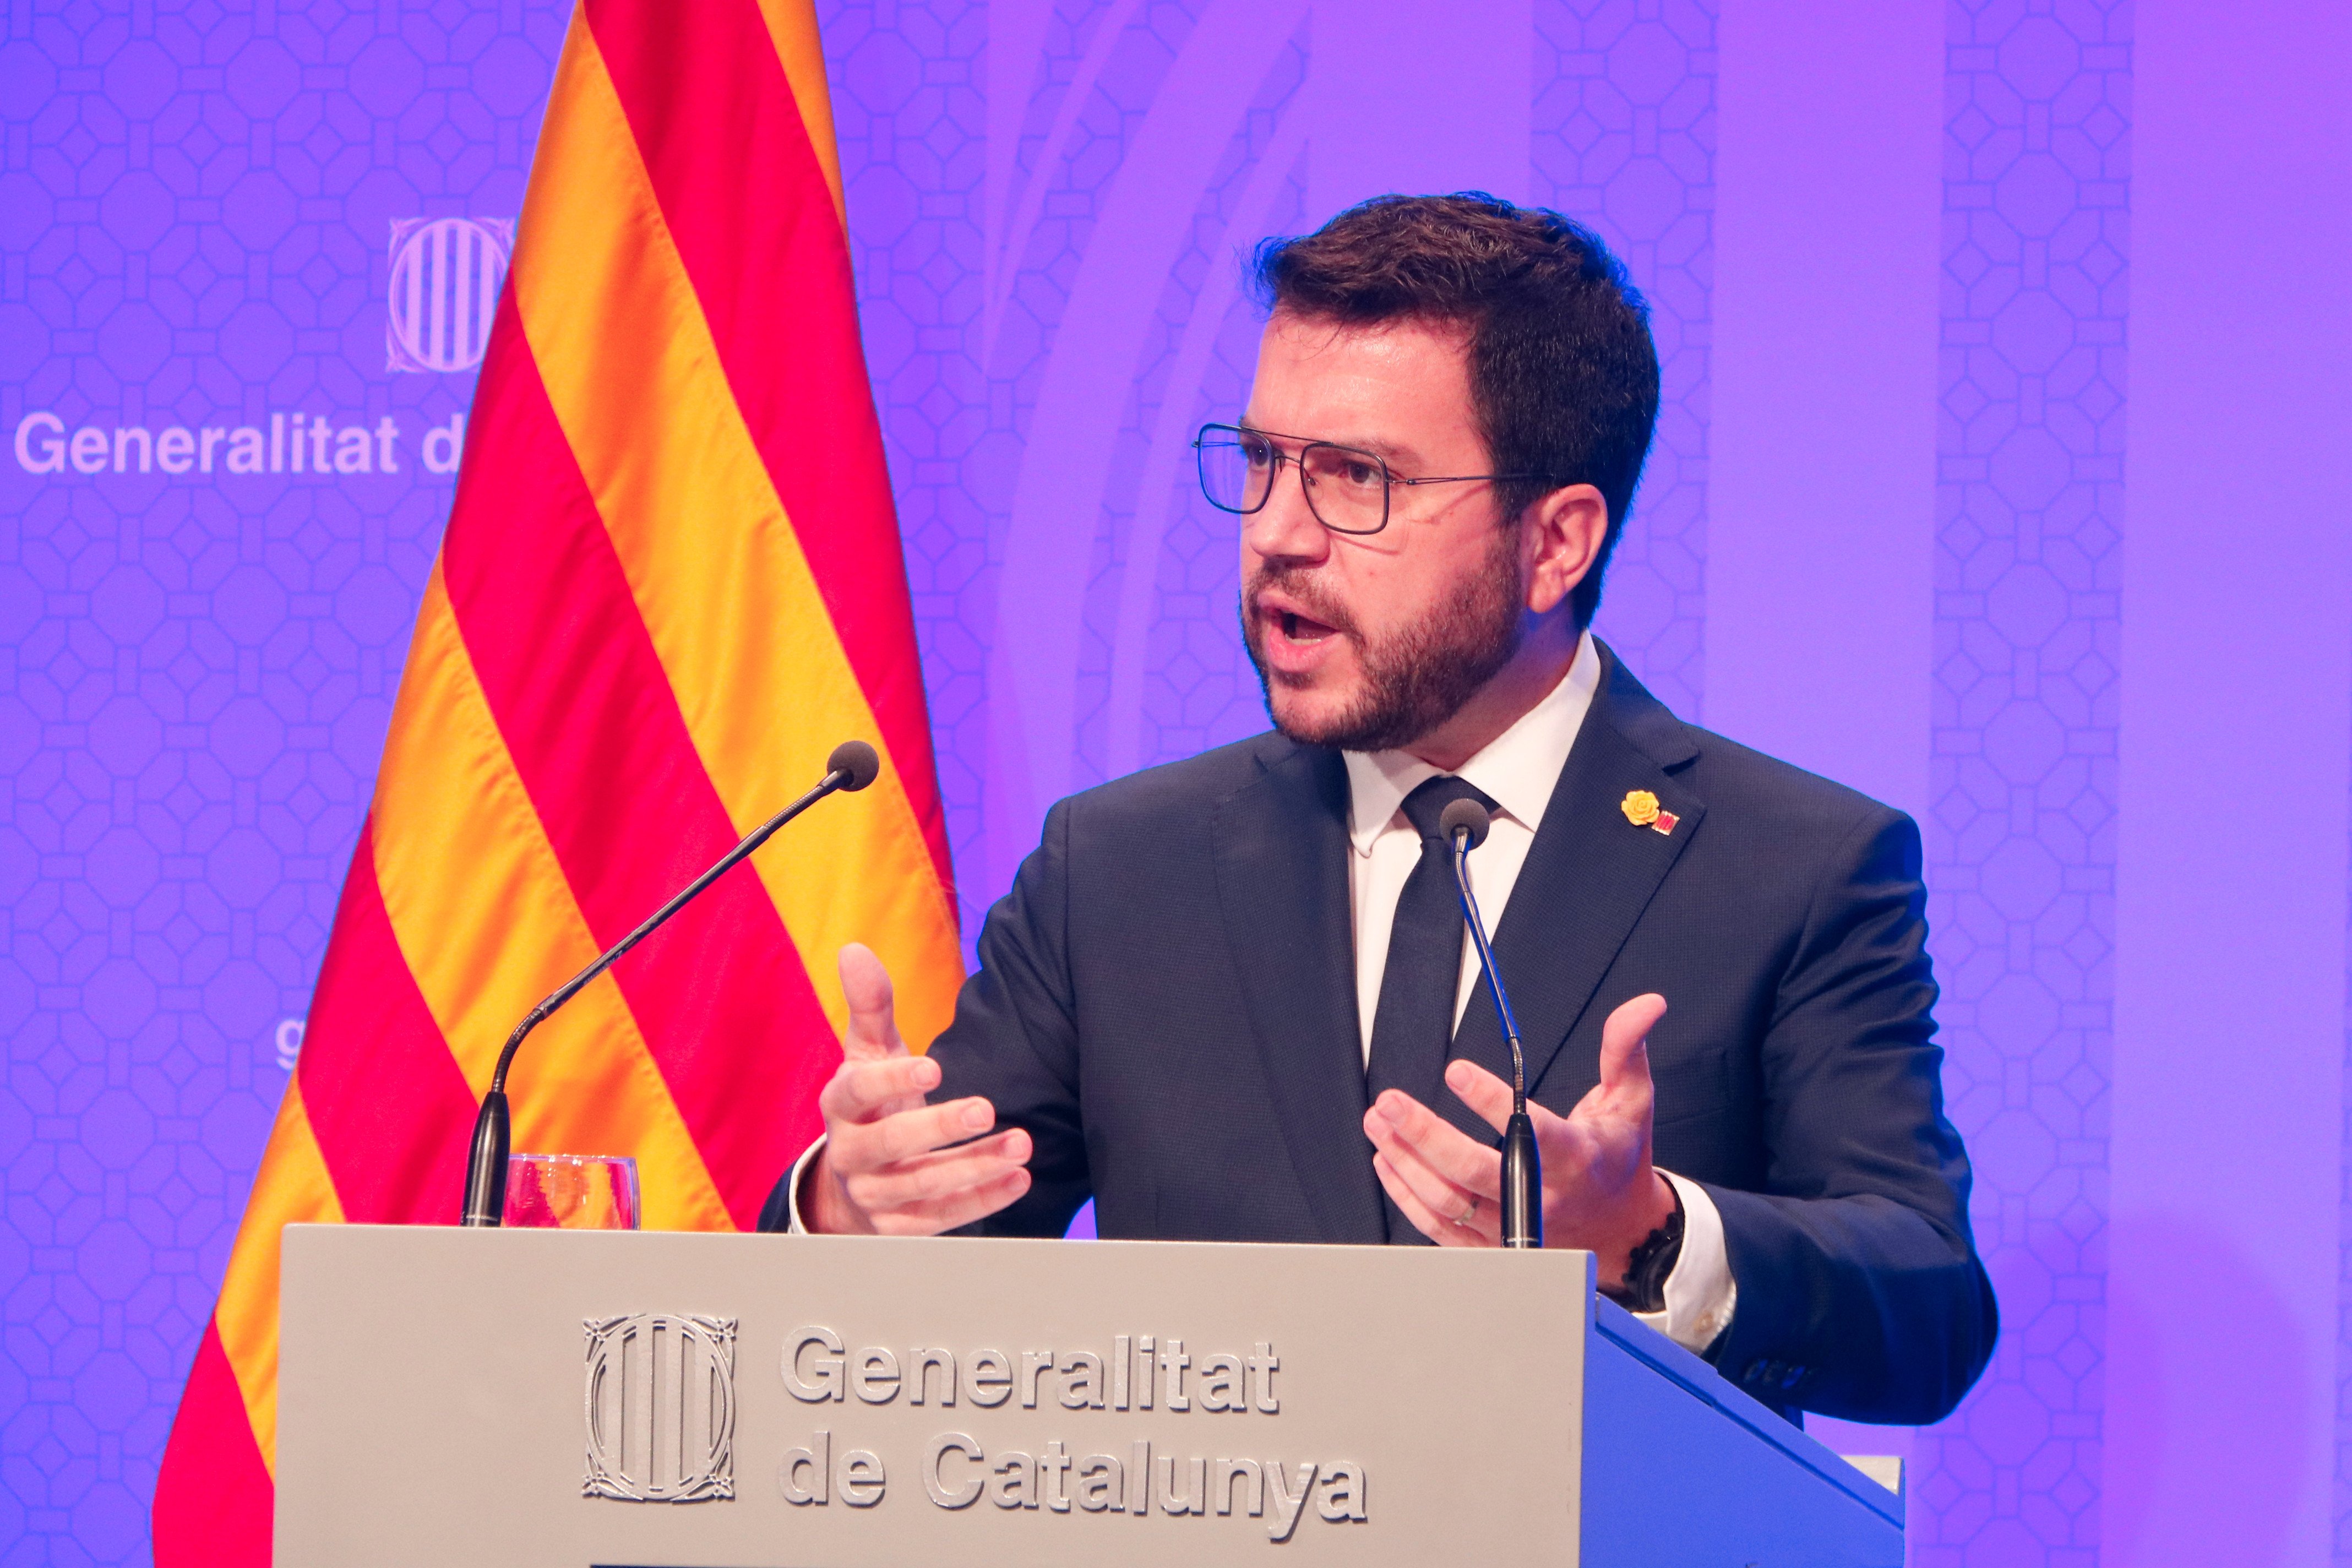 Aragonès on Catalonia's negotiation with the state: "No one said it would be easy"